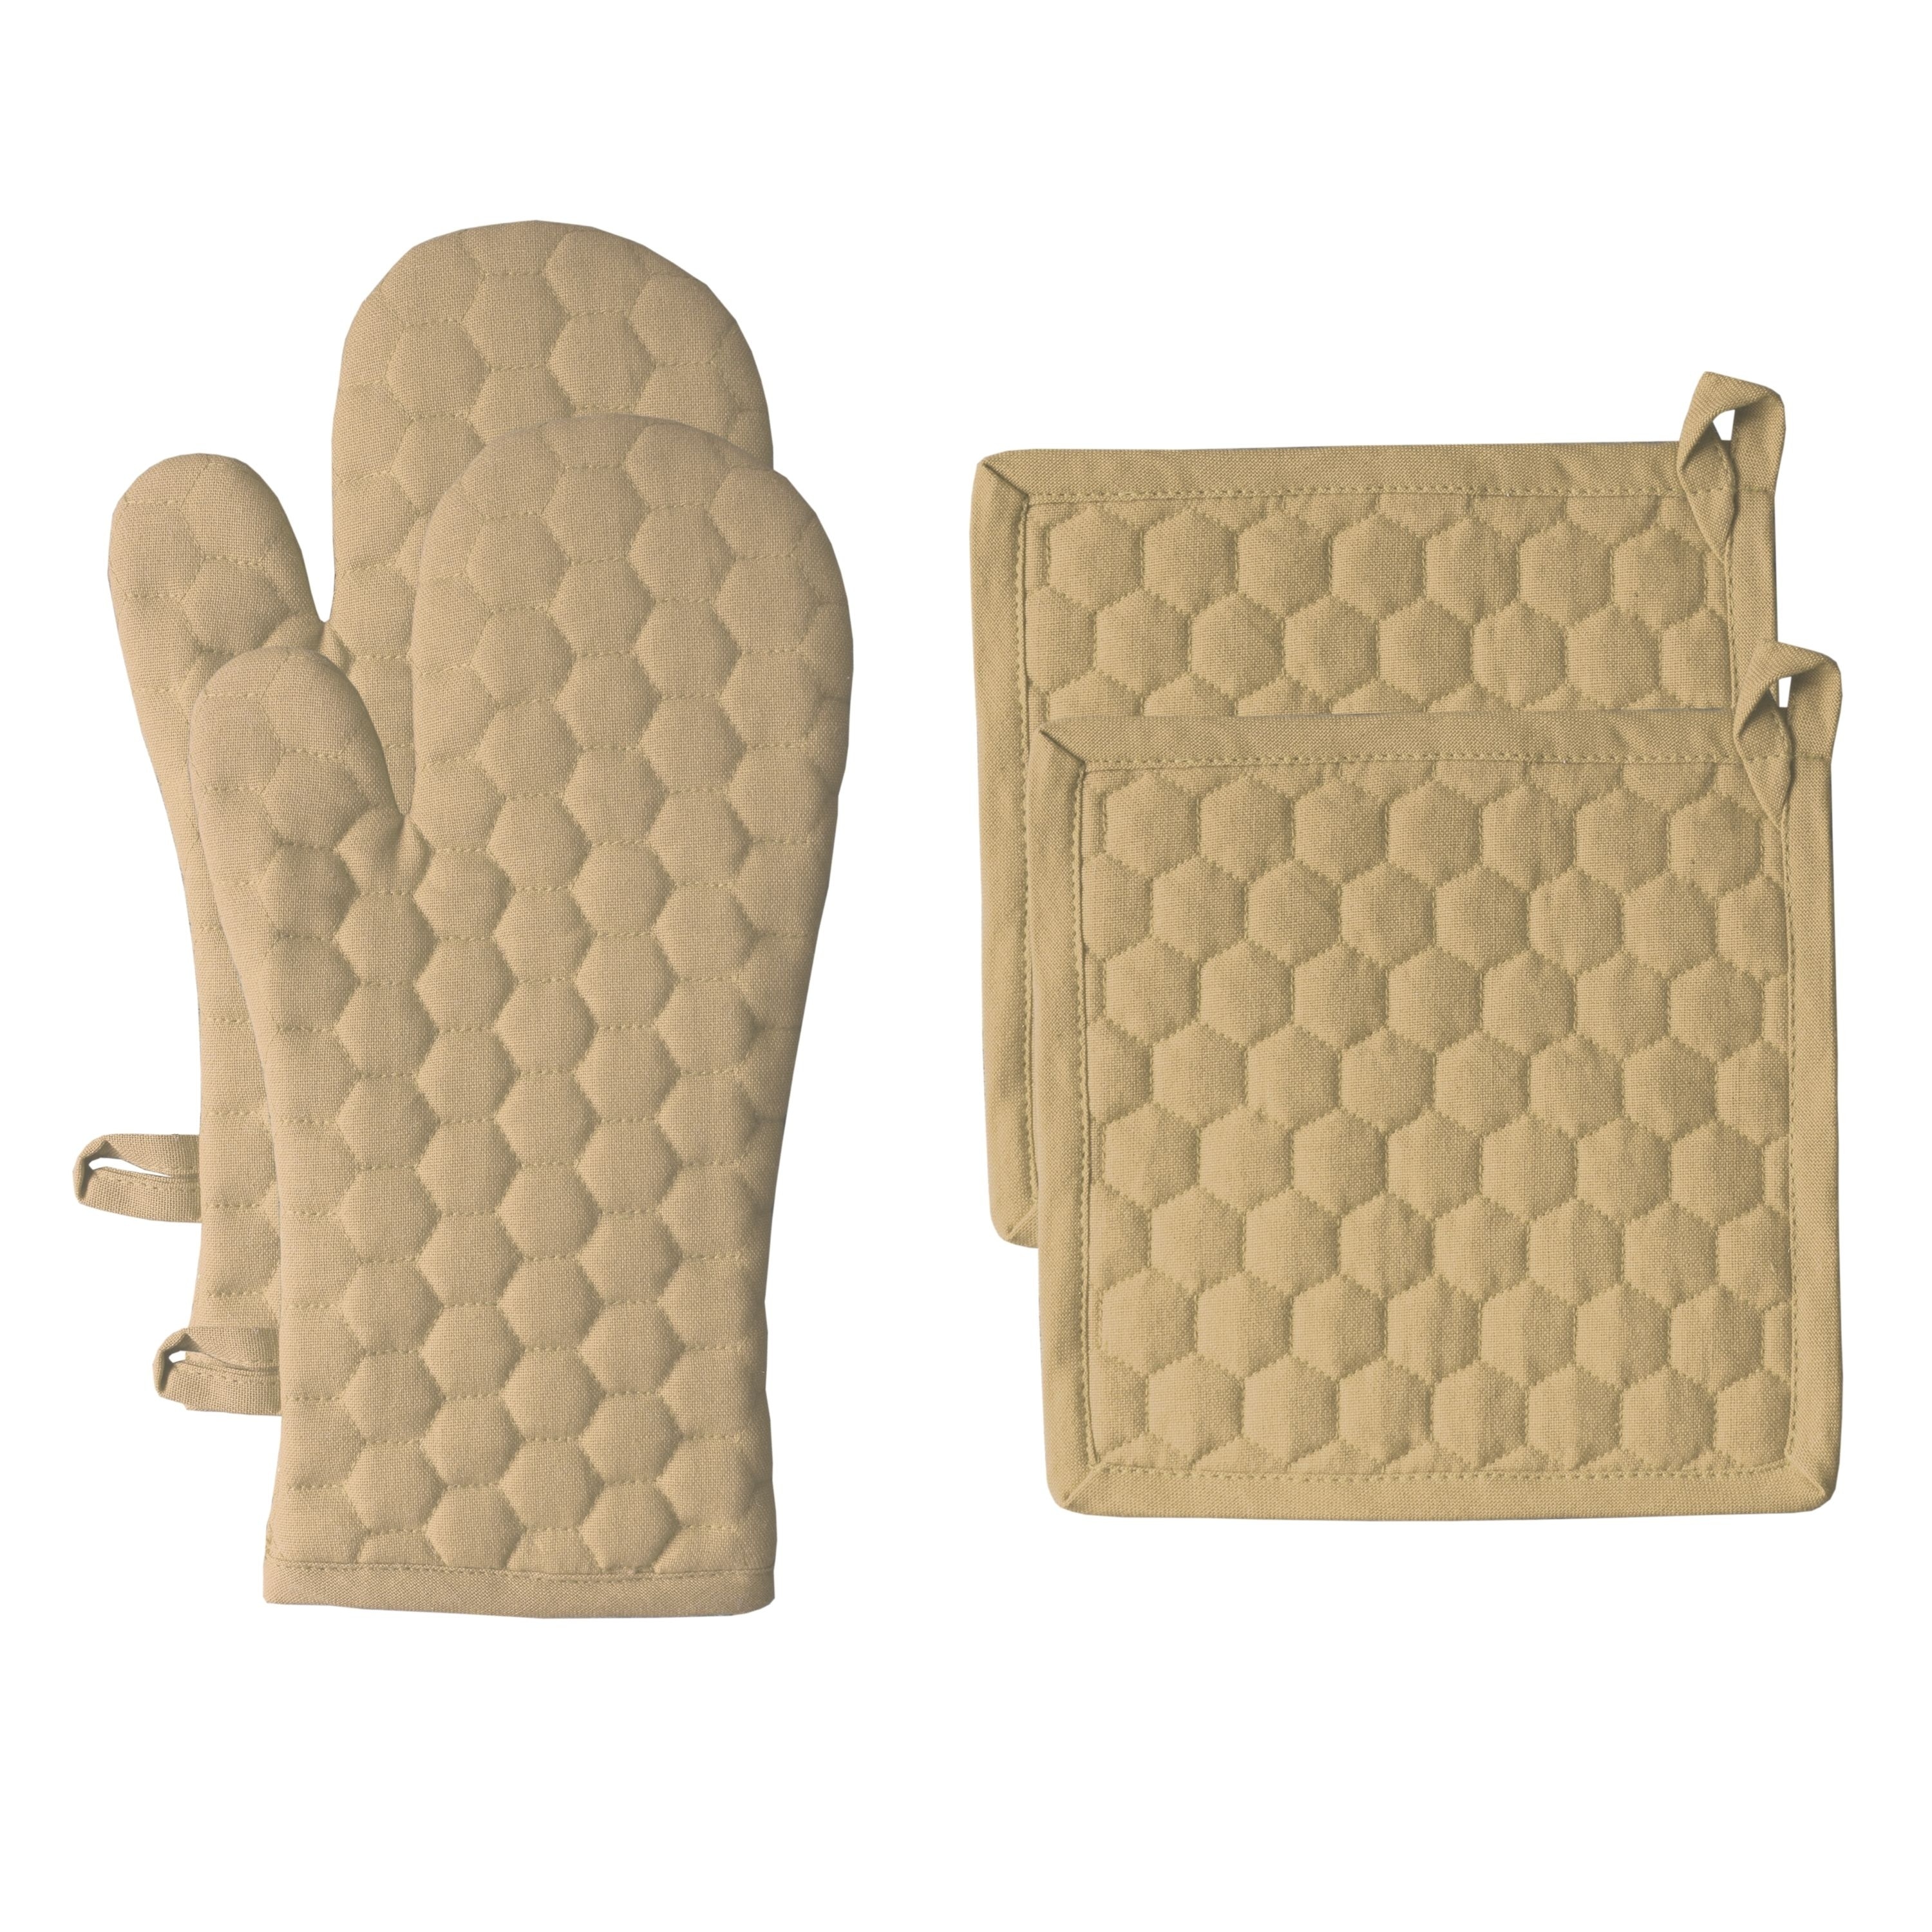 https://ak1.ostkcdn.com/images/products/is/images/direct/787bc6f93adacbfbb47866c69bc7522410419f42/Fabstyles-Fouta-Cotton-Oven-Mitt-%26-Pot-Holder-Set-of-4.jpg